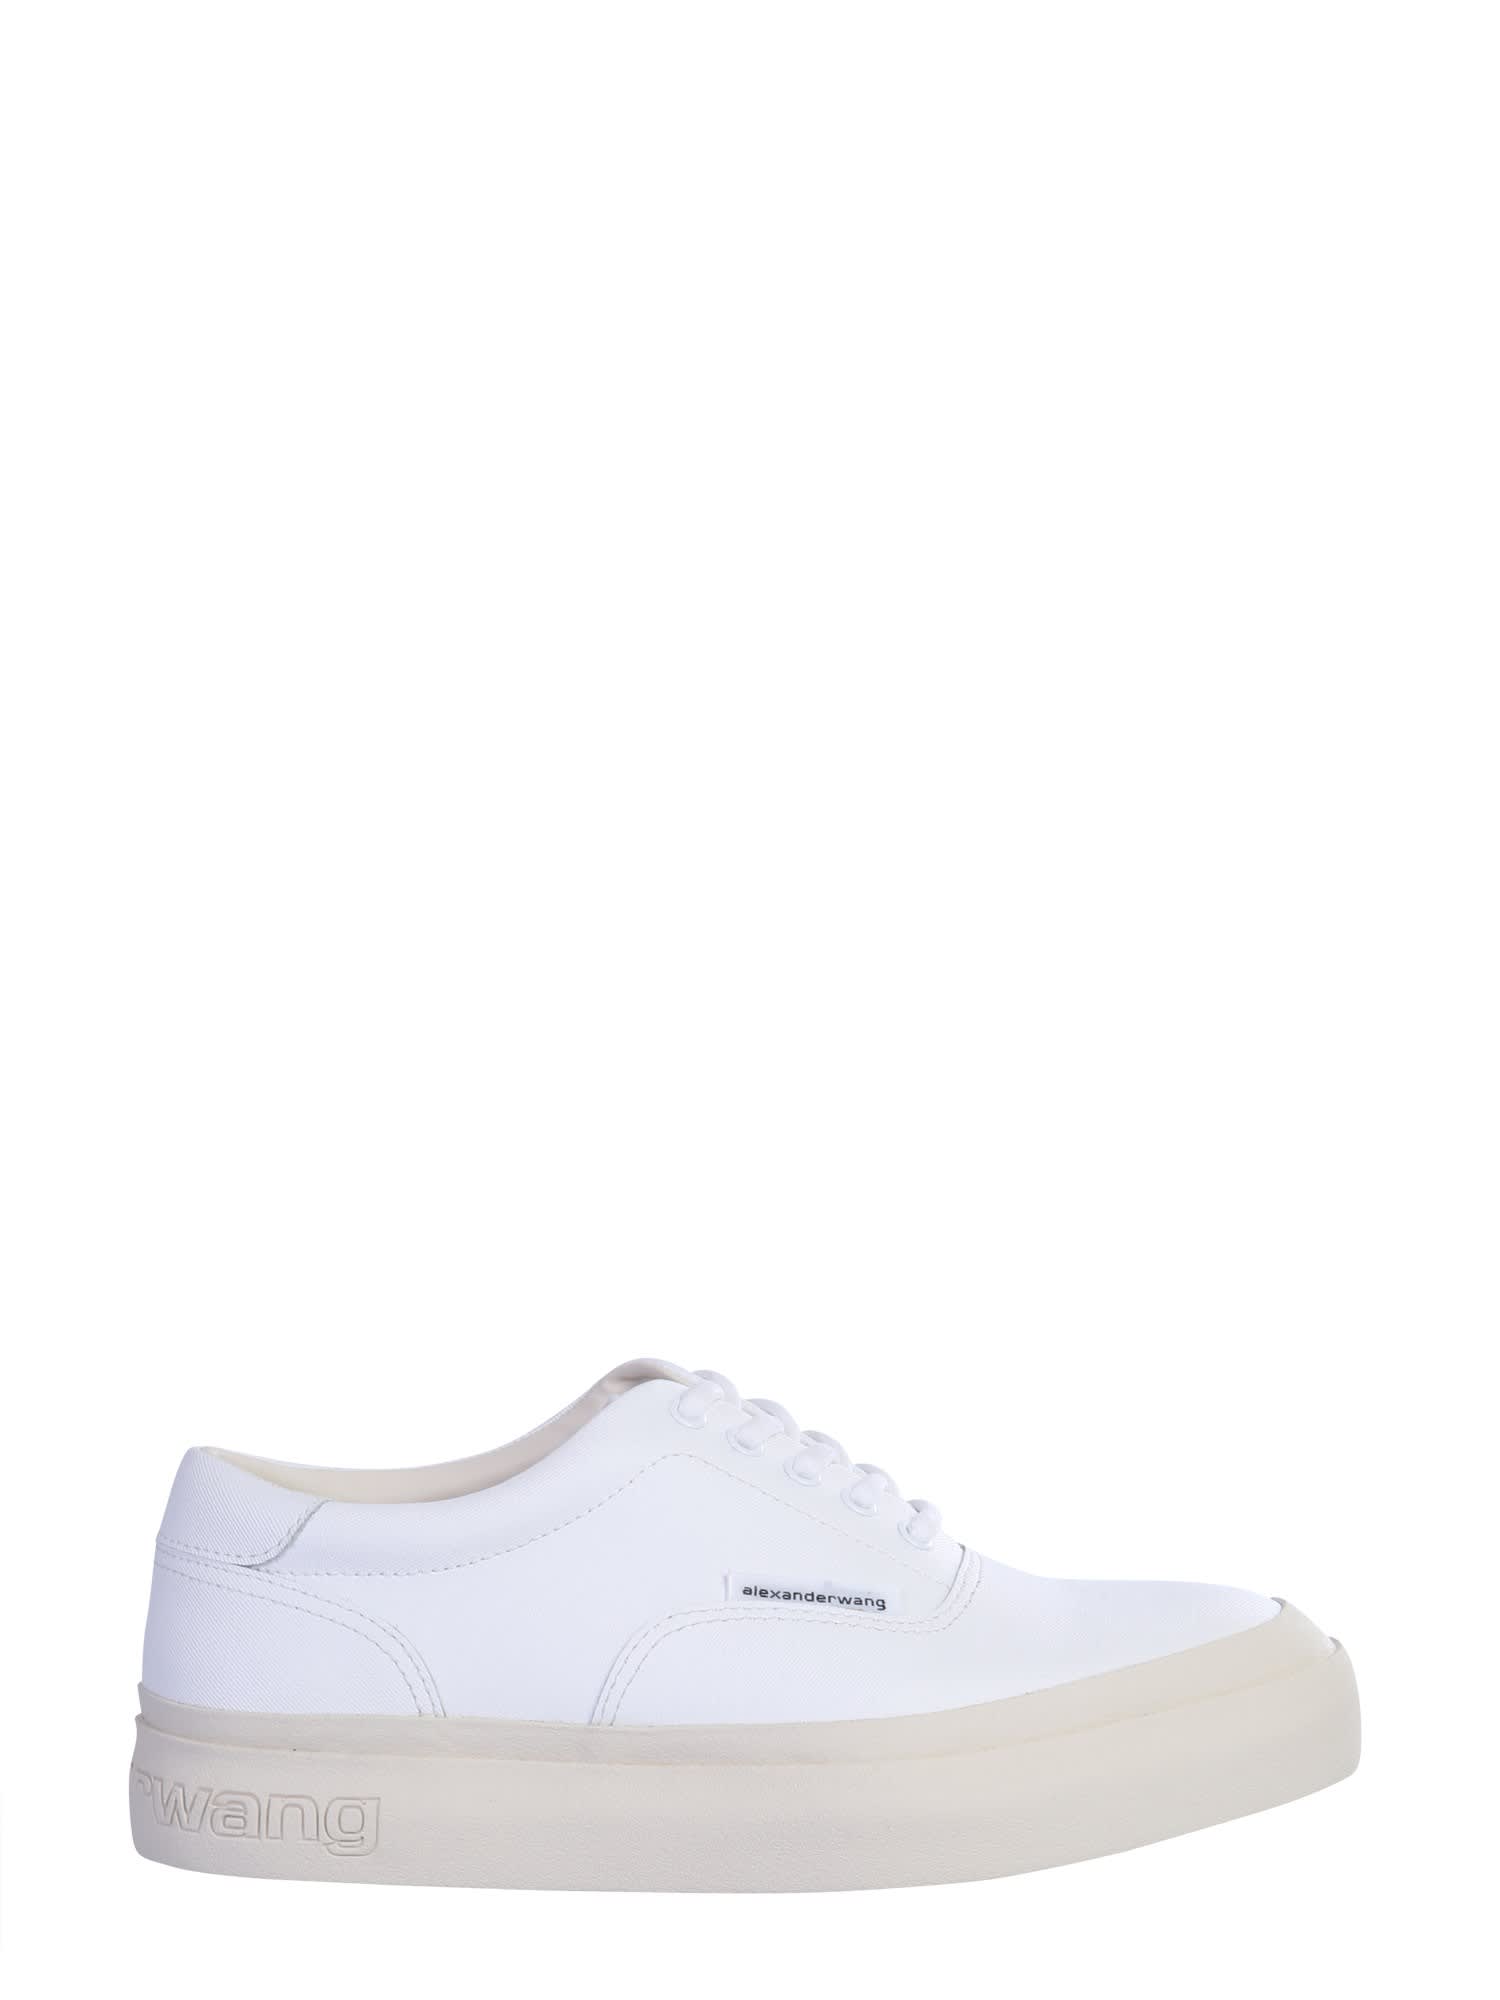 Buy Alexander Wang Andy Sneakers online, shop Alexander Wang shoes with free shipping